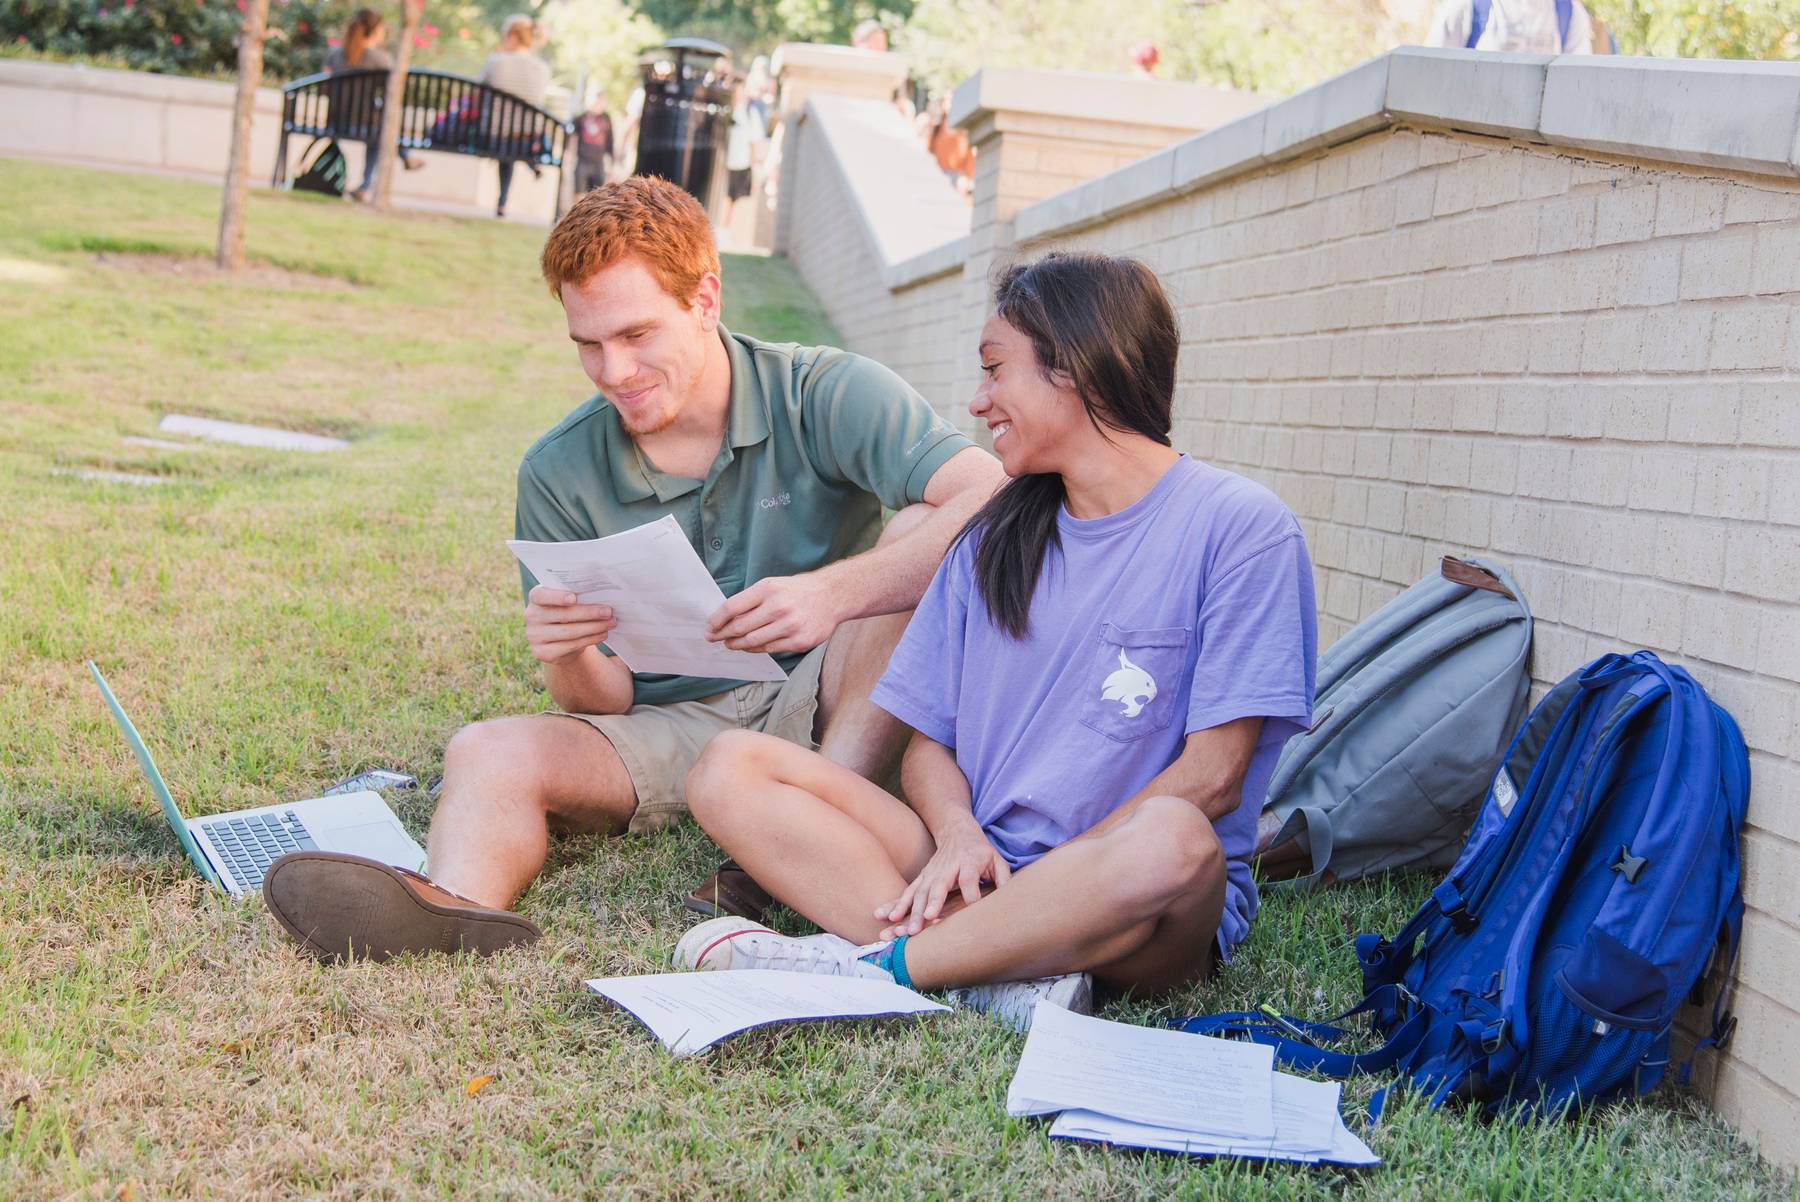 two students sitting outside and looking at a paper together. their backpacks are next to them.